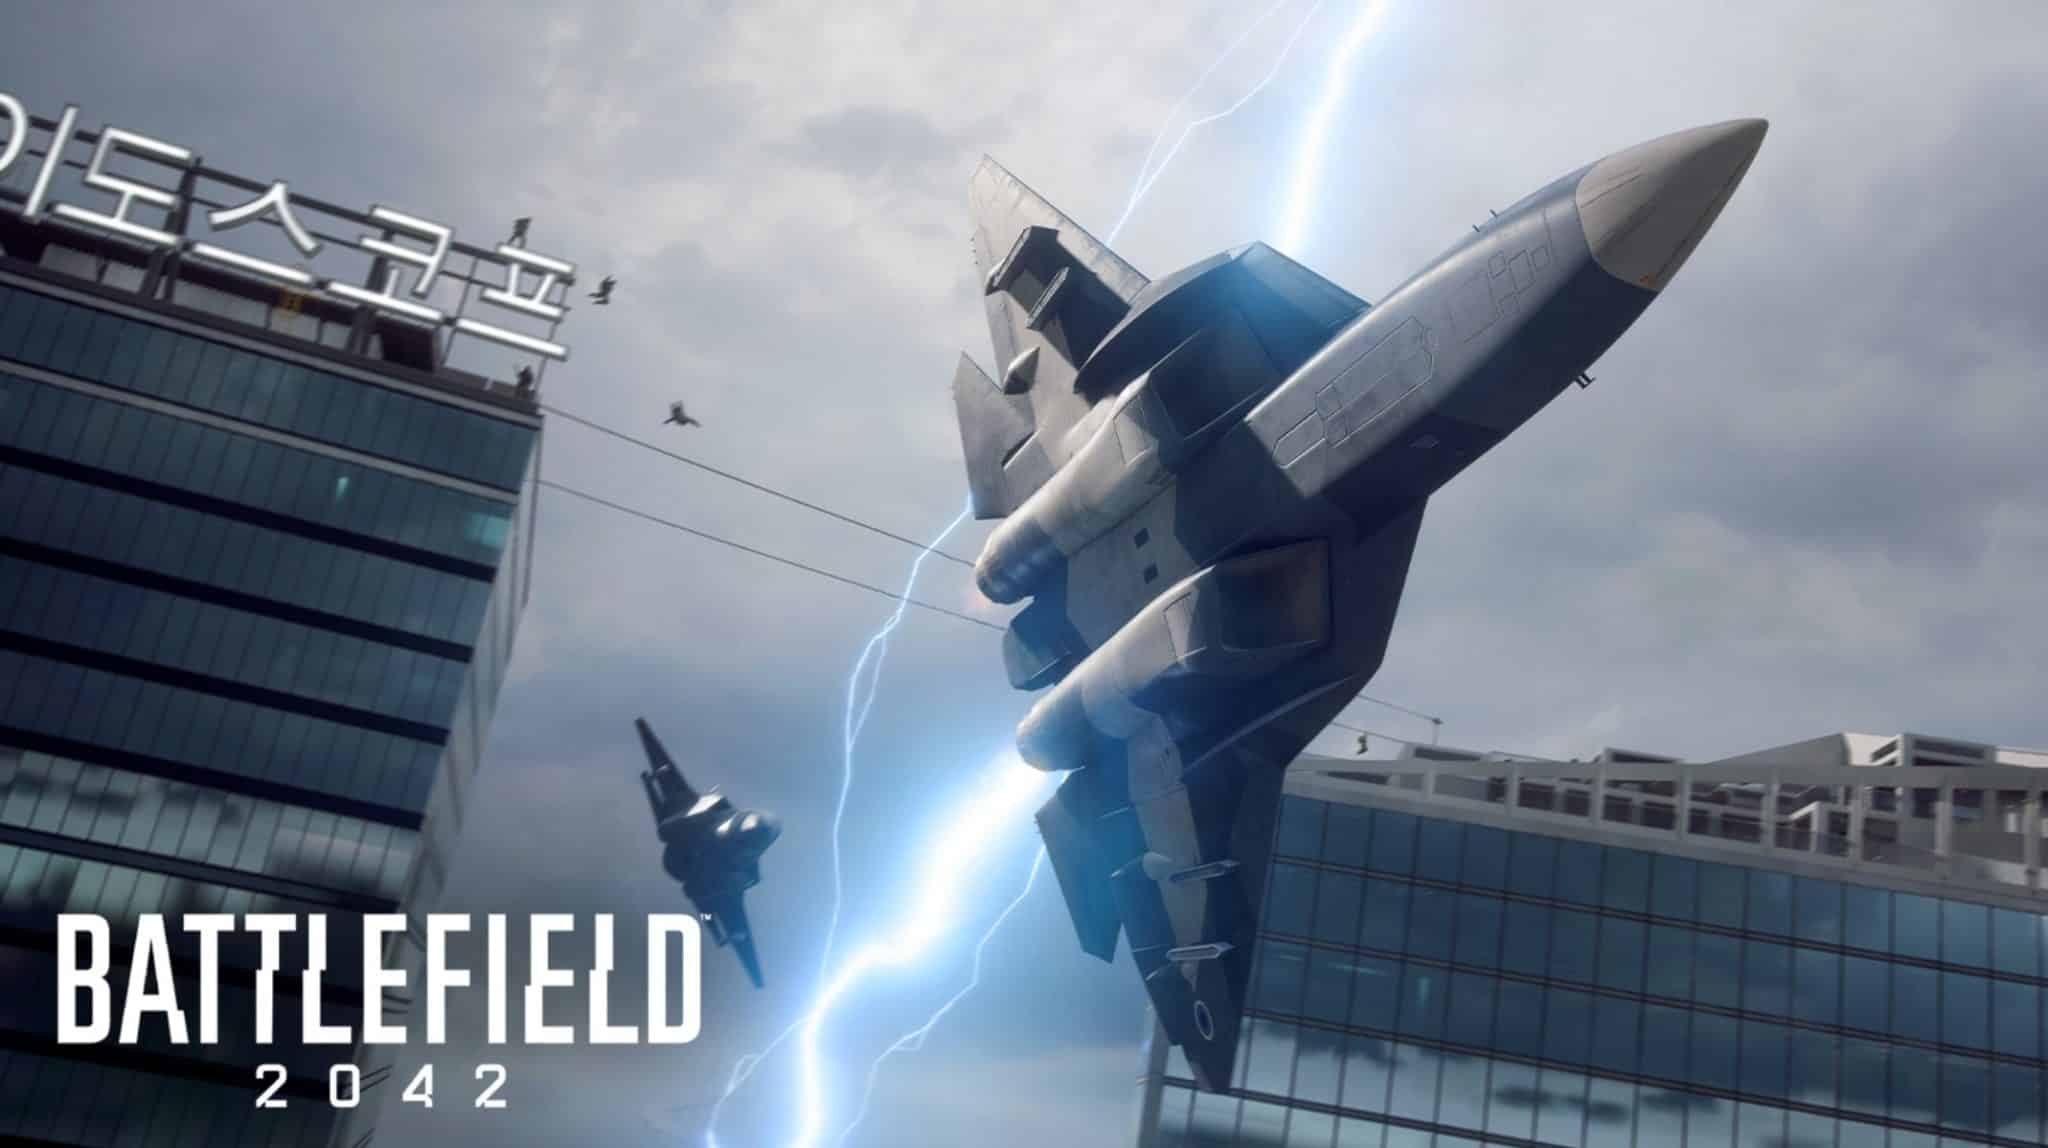 Battlefield 2042 release date, early access, and everything we know